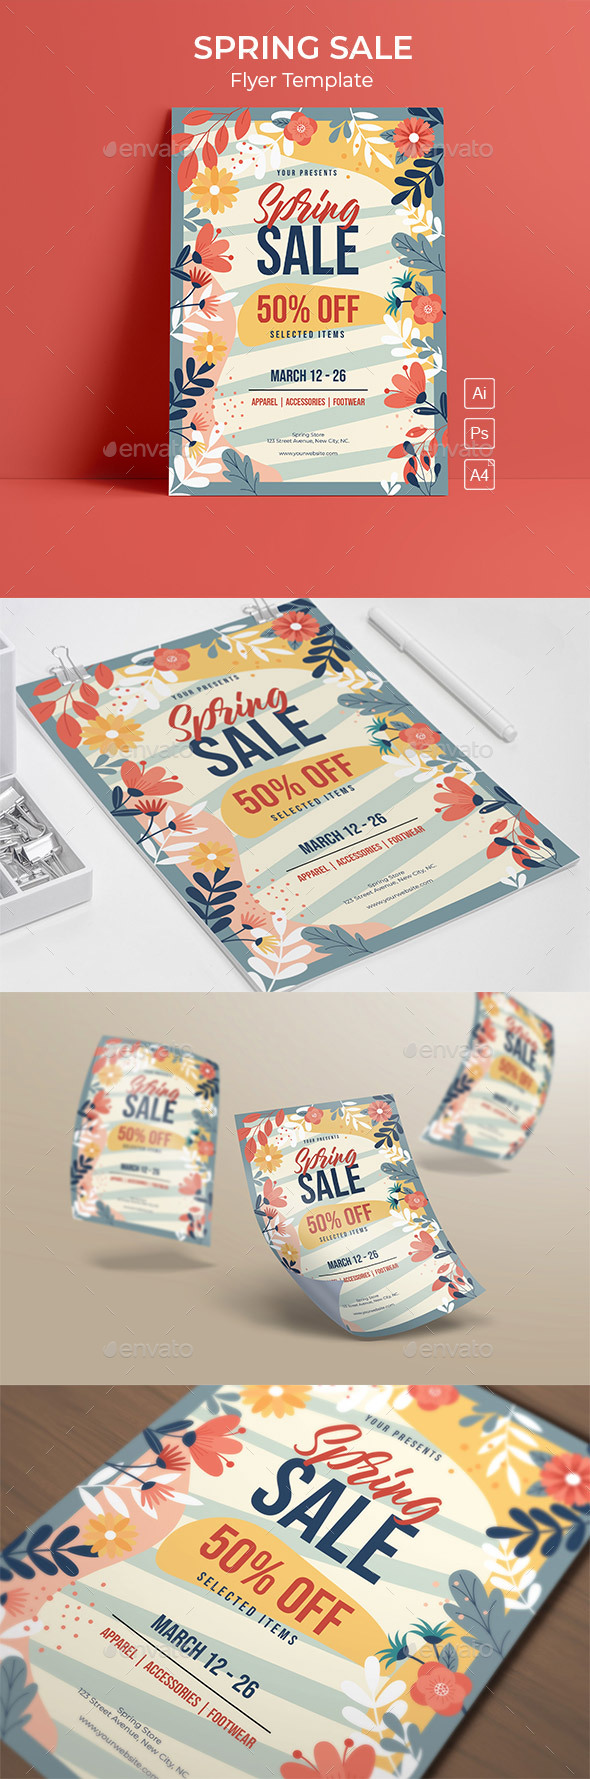 [DOWNLOAD]Spring Sale Flyers Template